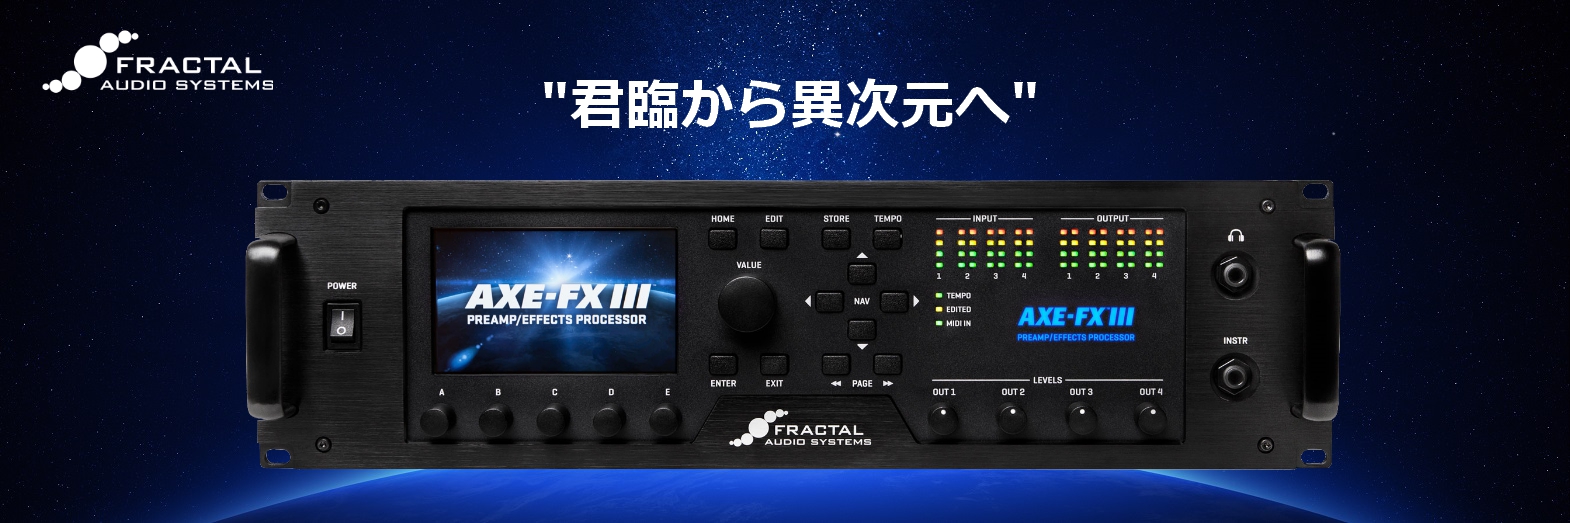 Fractal Audio System / Axe-Fx III | DiGiRECO